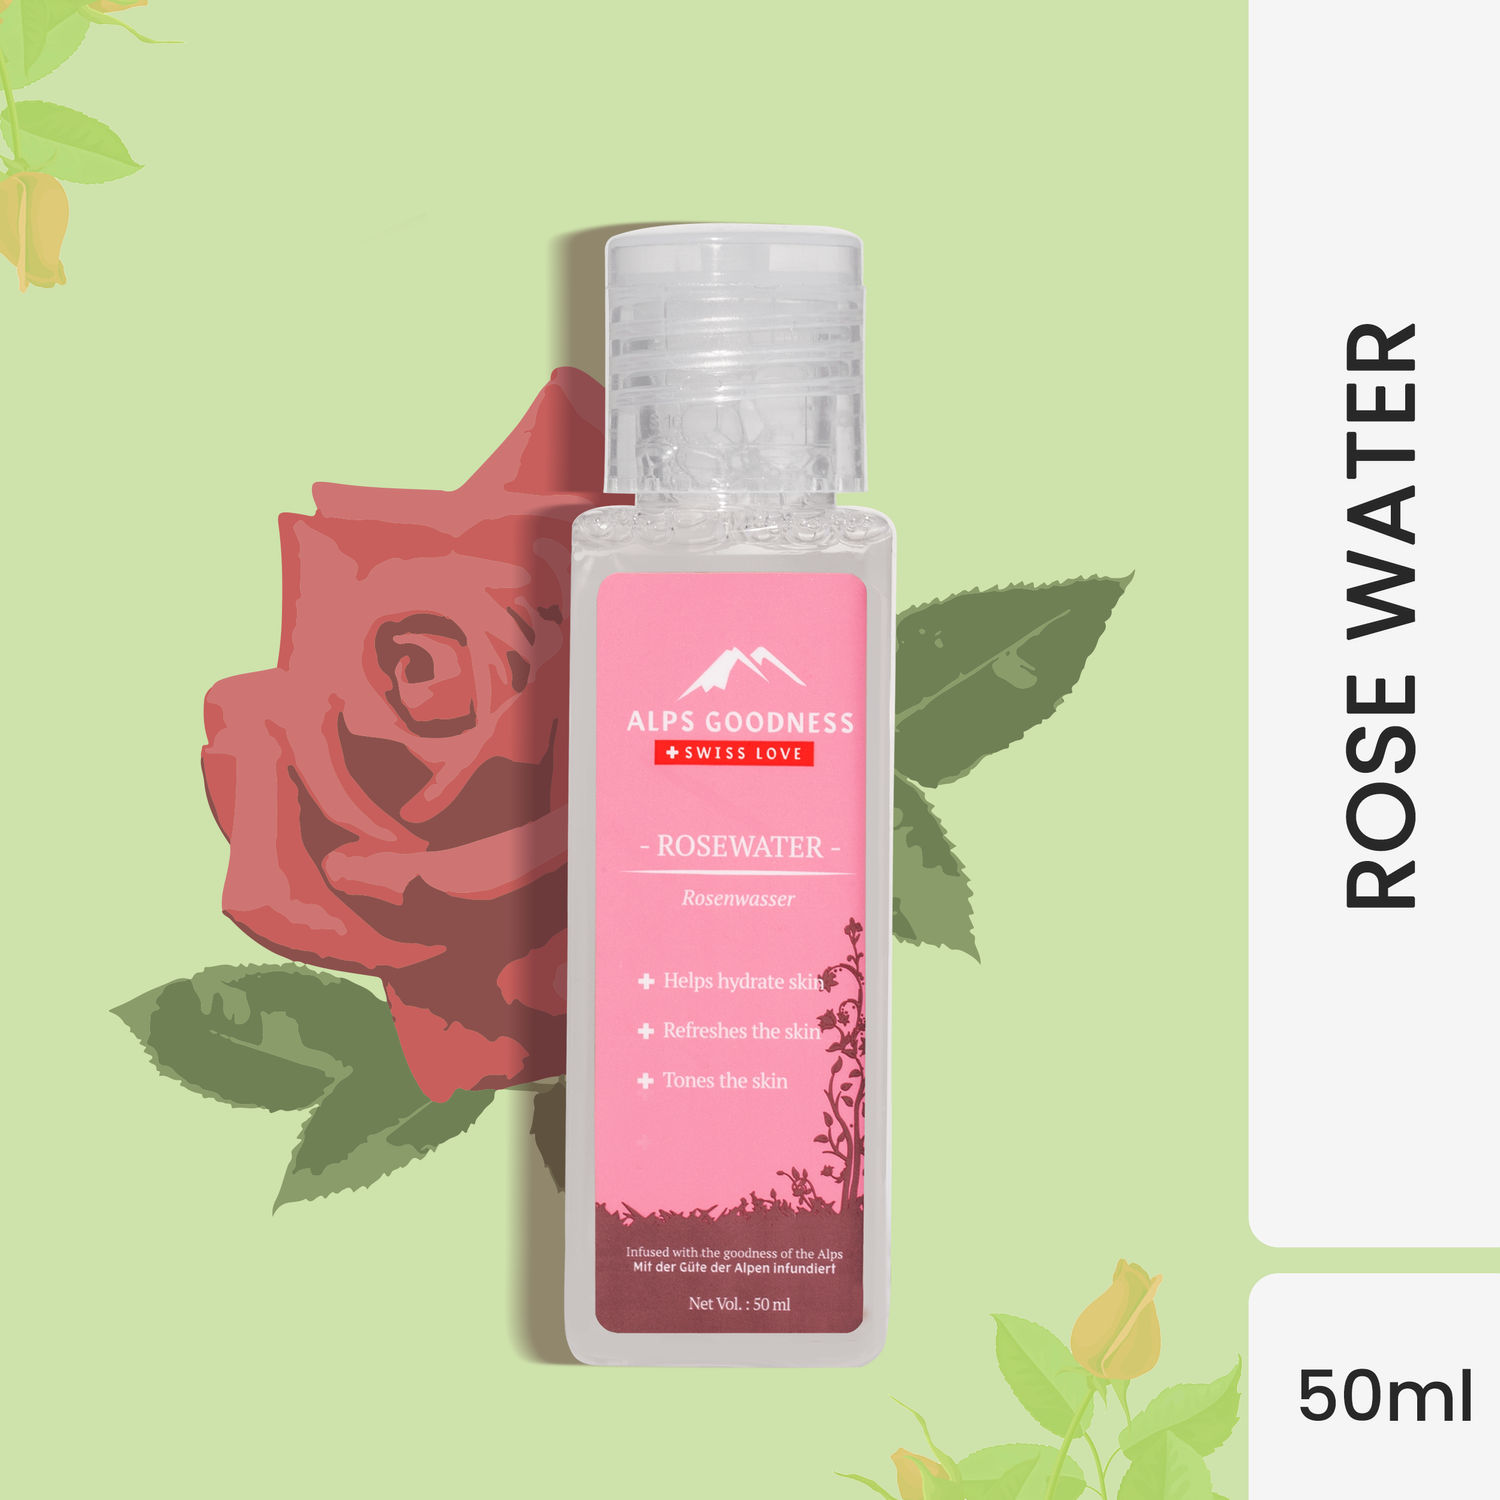 Alps Goodness Rosewater (50 ml)